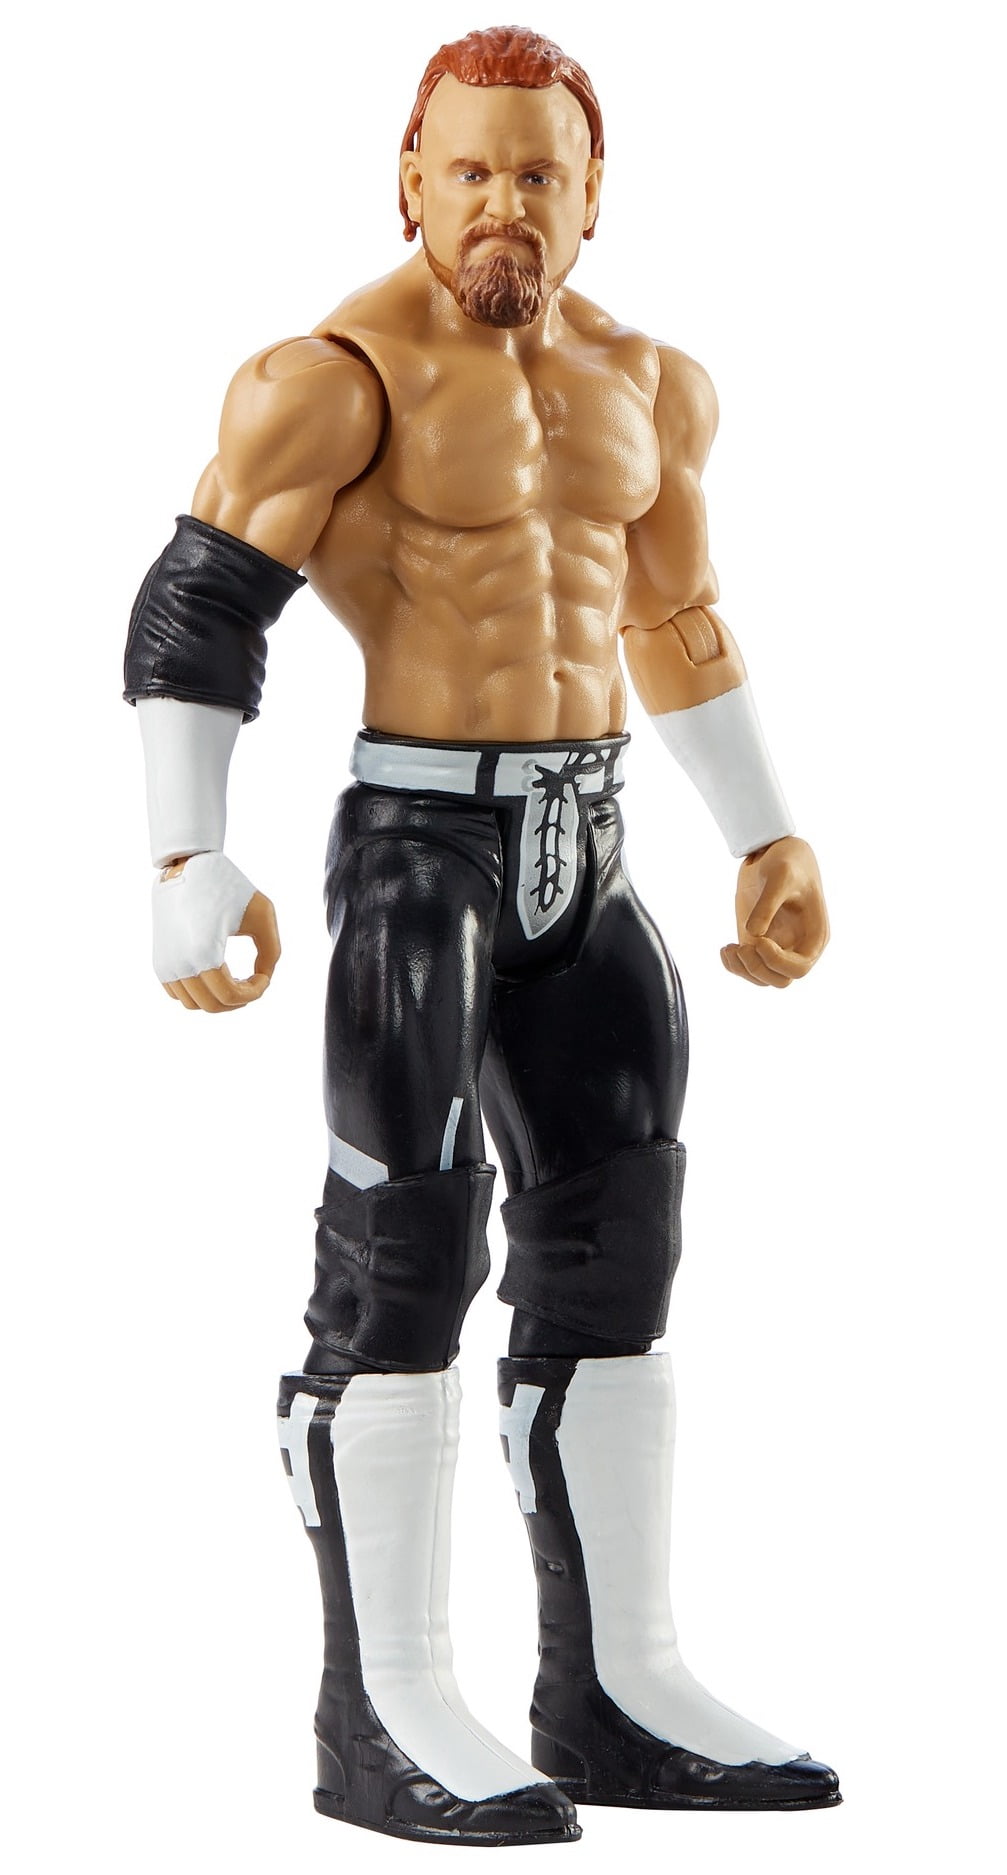 Details about   WWE Basic Series 113 Edge 15cm Action Figure Wrestle Collectable Model Kids Toy 